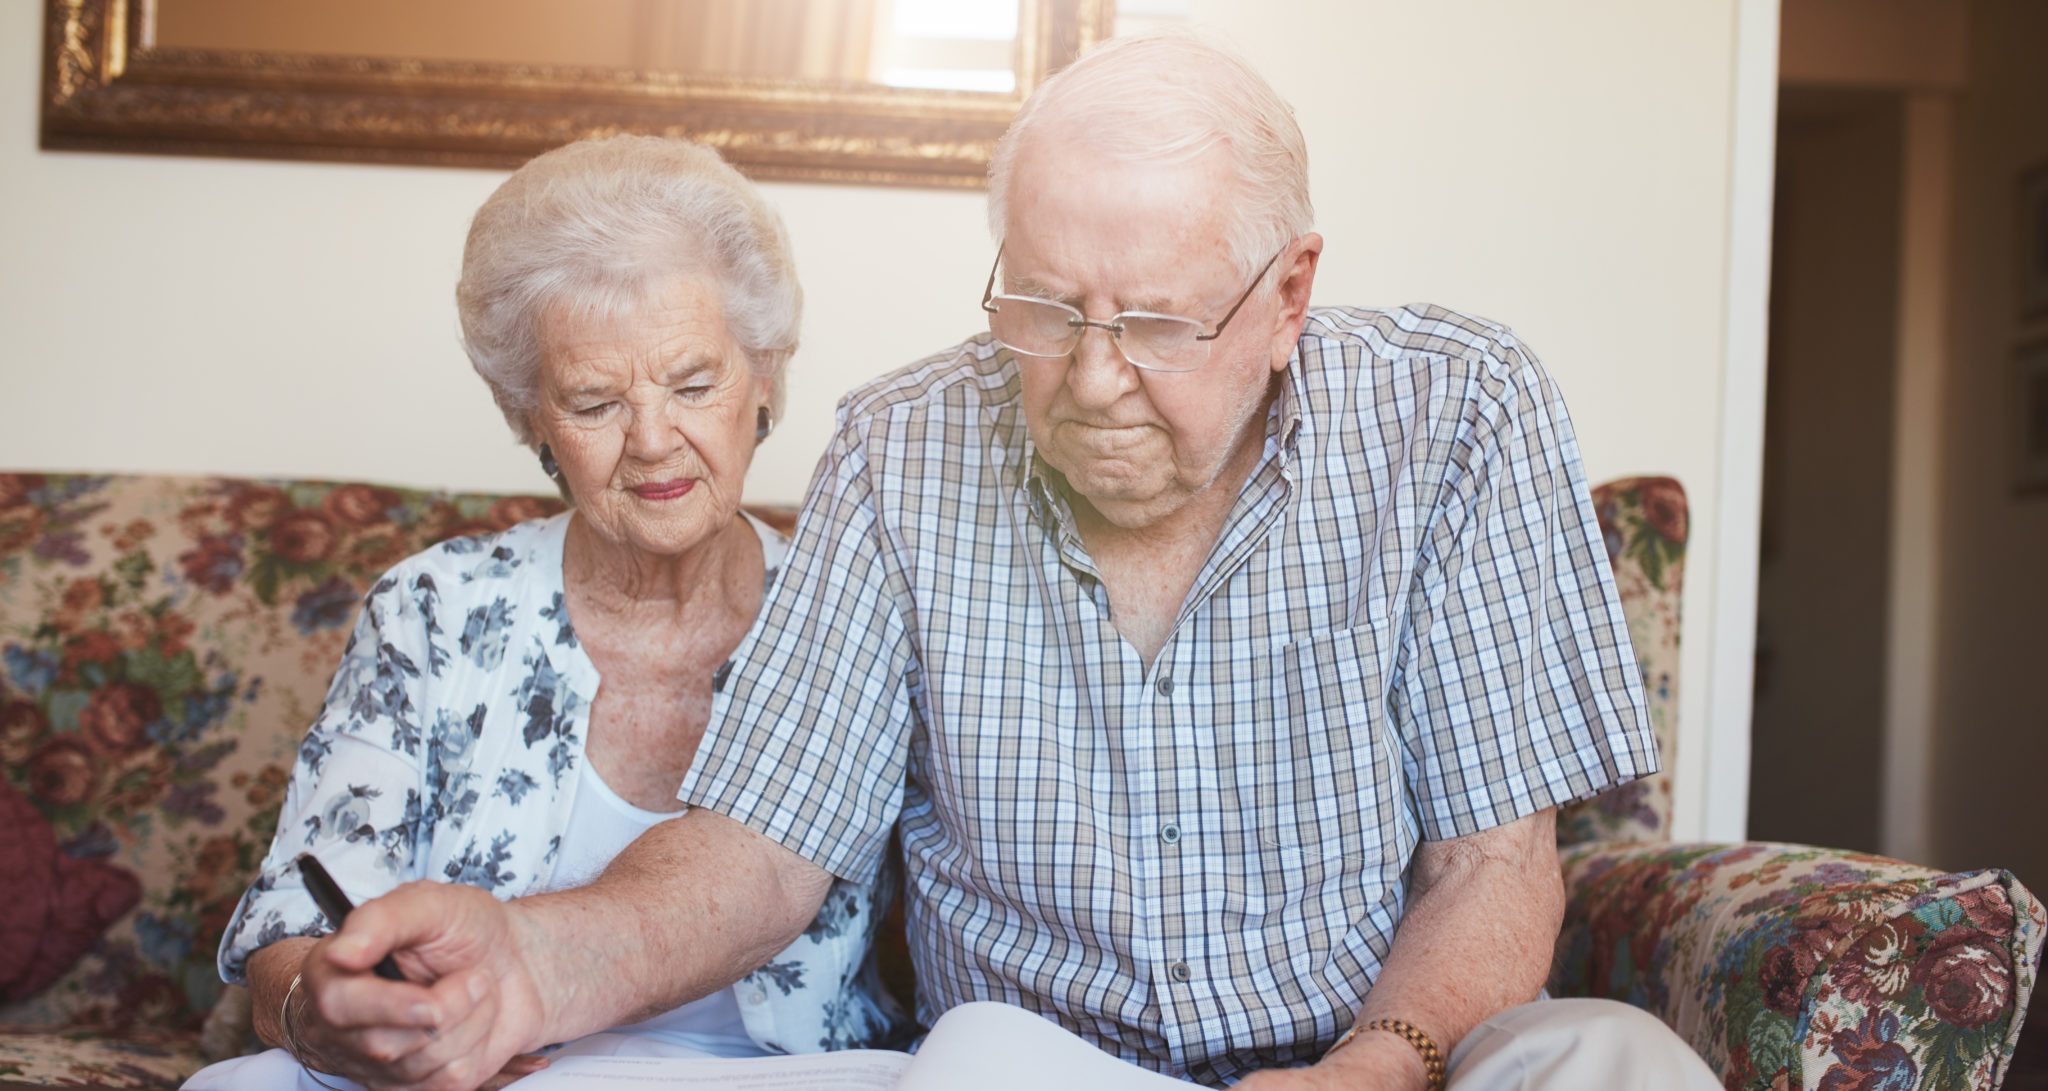 Elderly man and woman looking over revocable living trust document